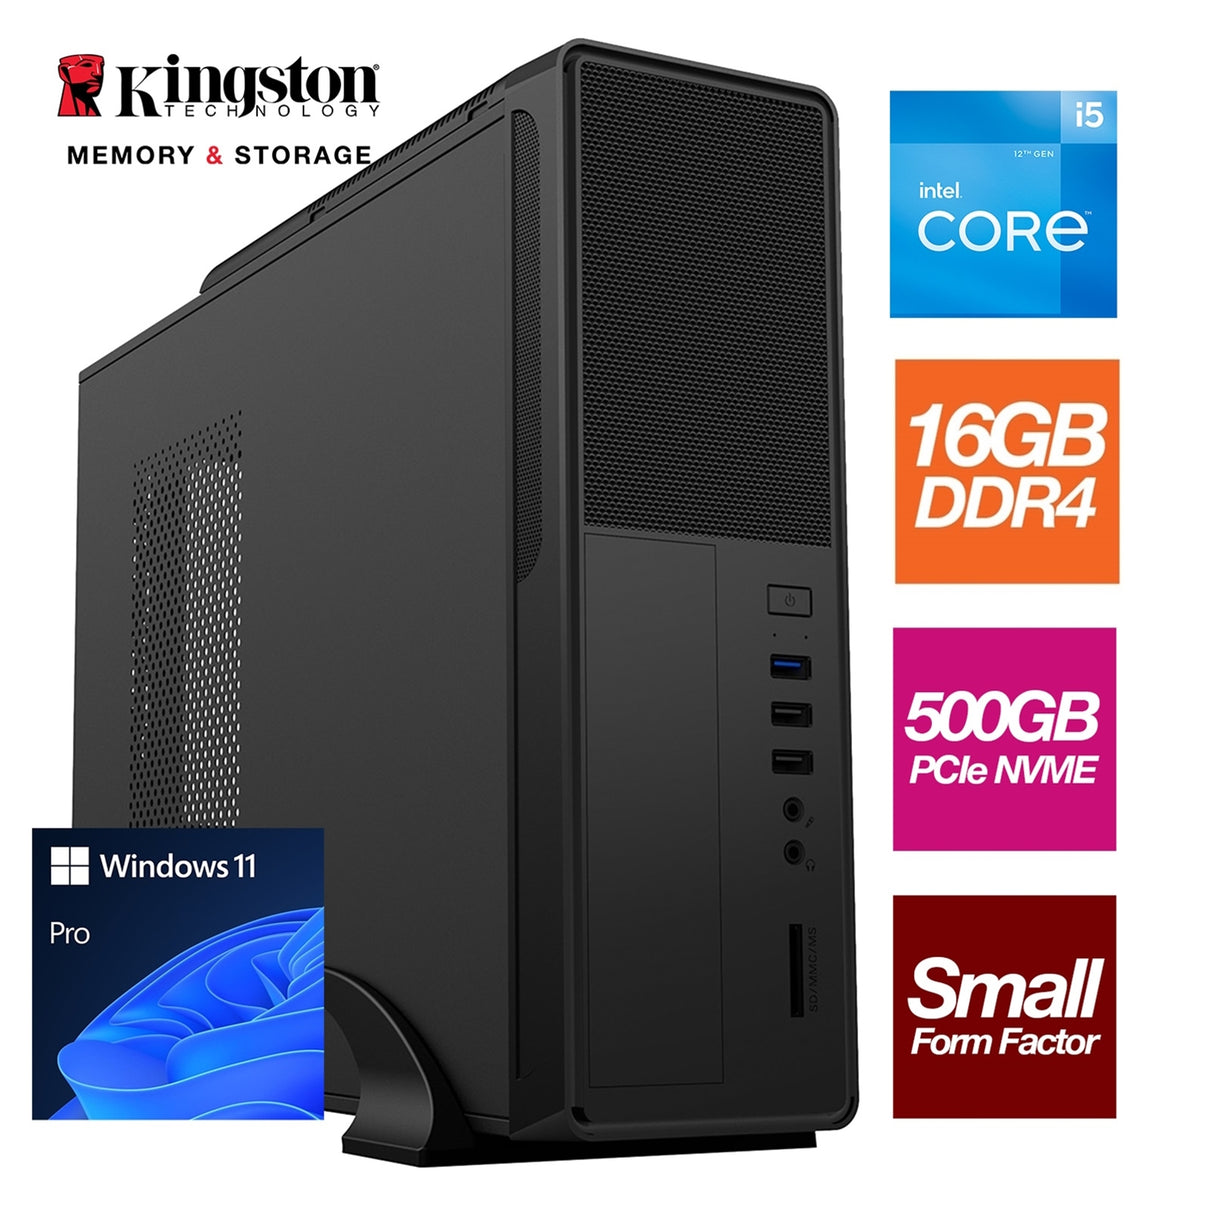 Small Form Factor - Intel i5 12400 6 Core 12 Threads 2.50GHz (4.40GHz Boost), 16GB Kingston RAM, 500GB Kingston NVMe M.2,DVDRW Optical, with Windows 11 Pro Installed - Small Foot Print for Home or Office Use - Pre-Built PC